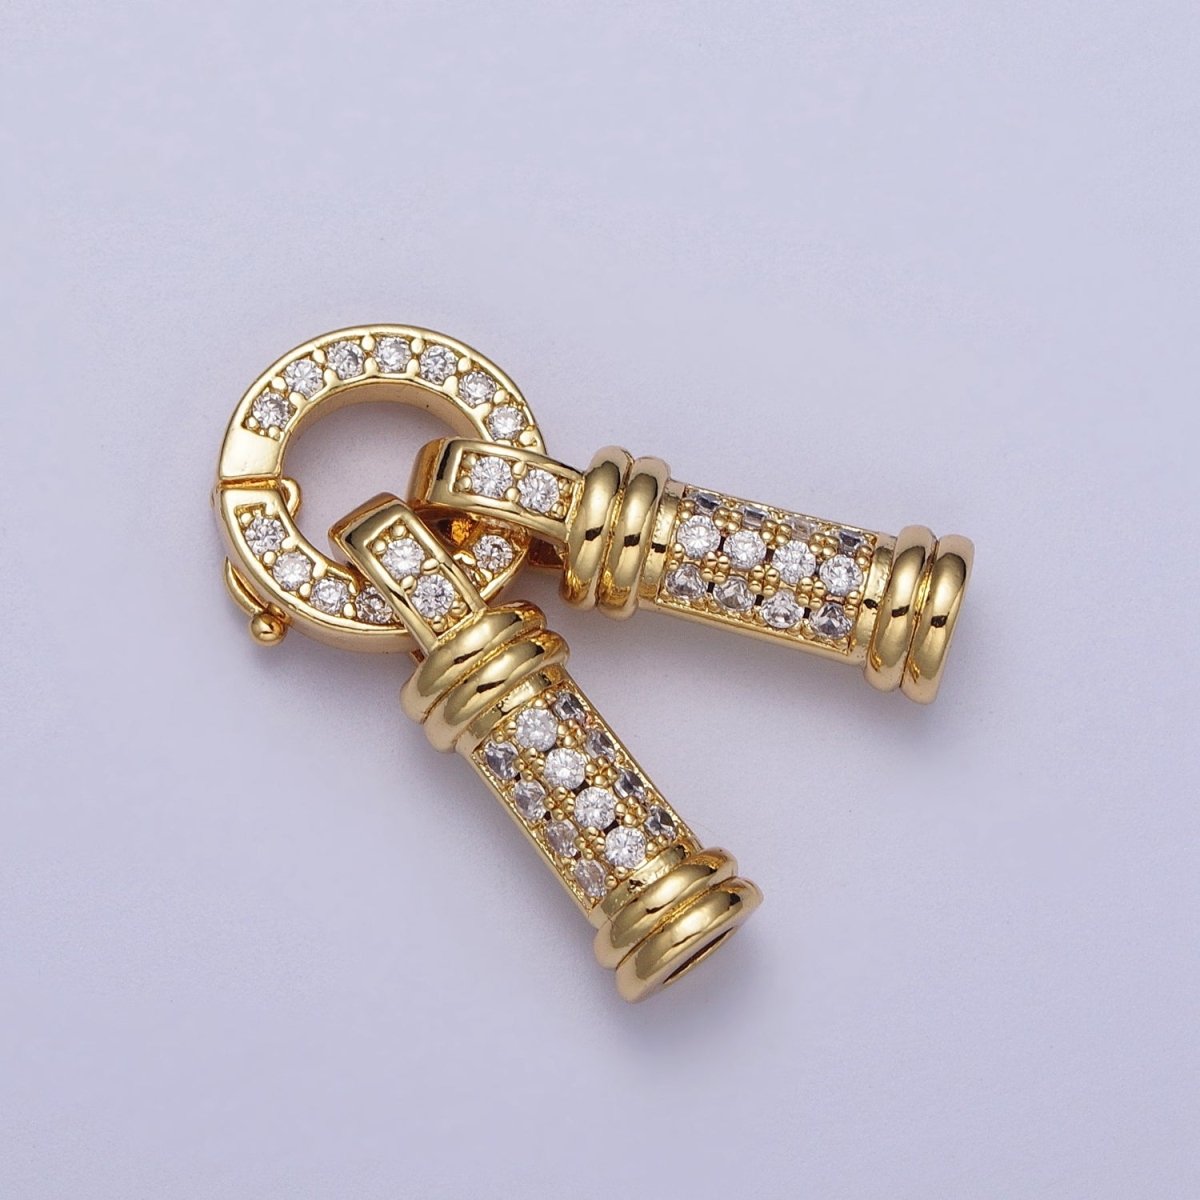 24K Gold Filled Micro Paved CZ Minimalist Double Loop Leather Jewelry Spring Gate Closure | K-165 - DLUXCA